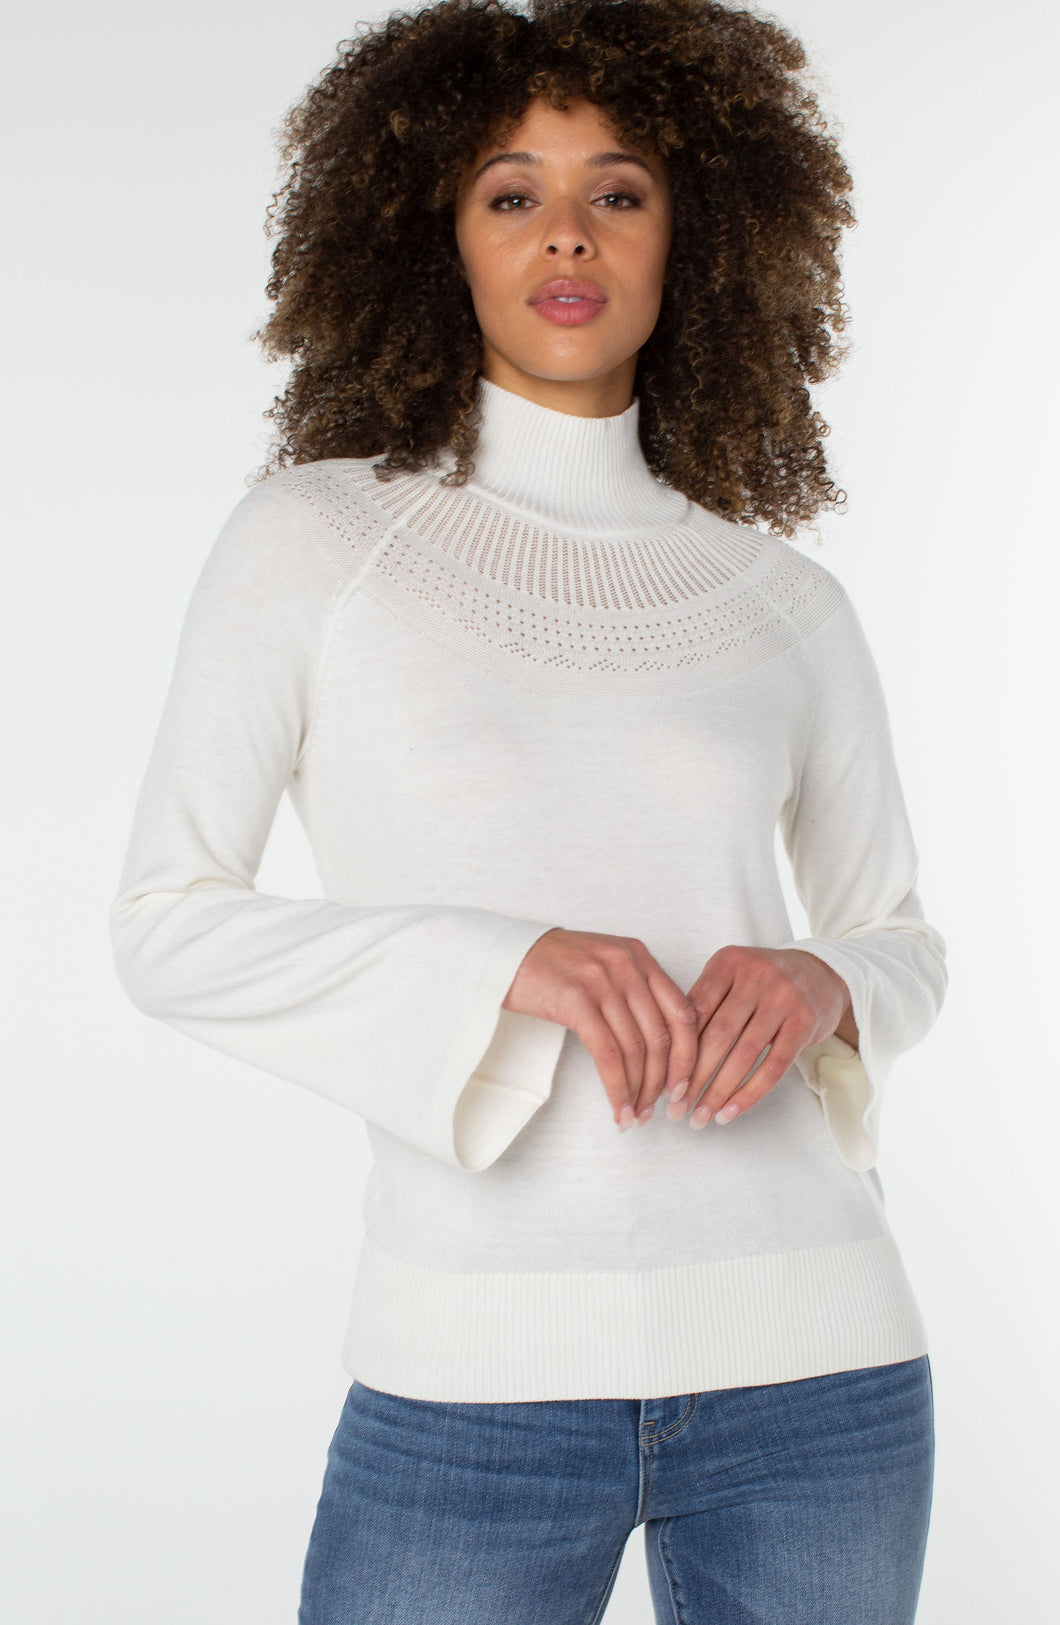 This timeless sweater is a classic blend of style and comfort. Crafted from a luxurious fabric in a porcelain white, with intricate pointelle stitching, it features a funnel neck and bell sleeves. Perfect for layering or wearing solo, it's a wardrobe essential. Color- Porcelain. Sweater yarn fabrication. Mock neckline. Bell sleeves. Pointelle detailing. Pullover construction.